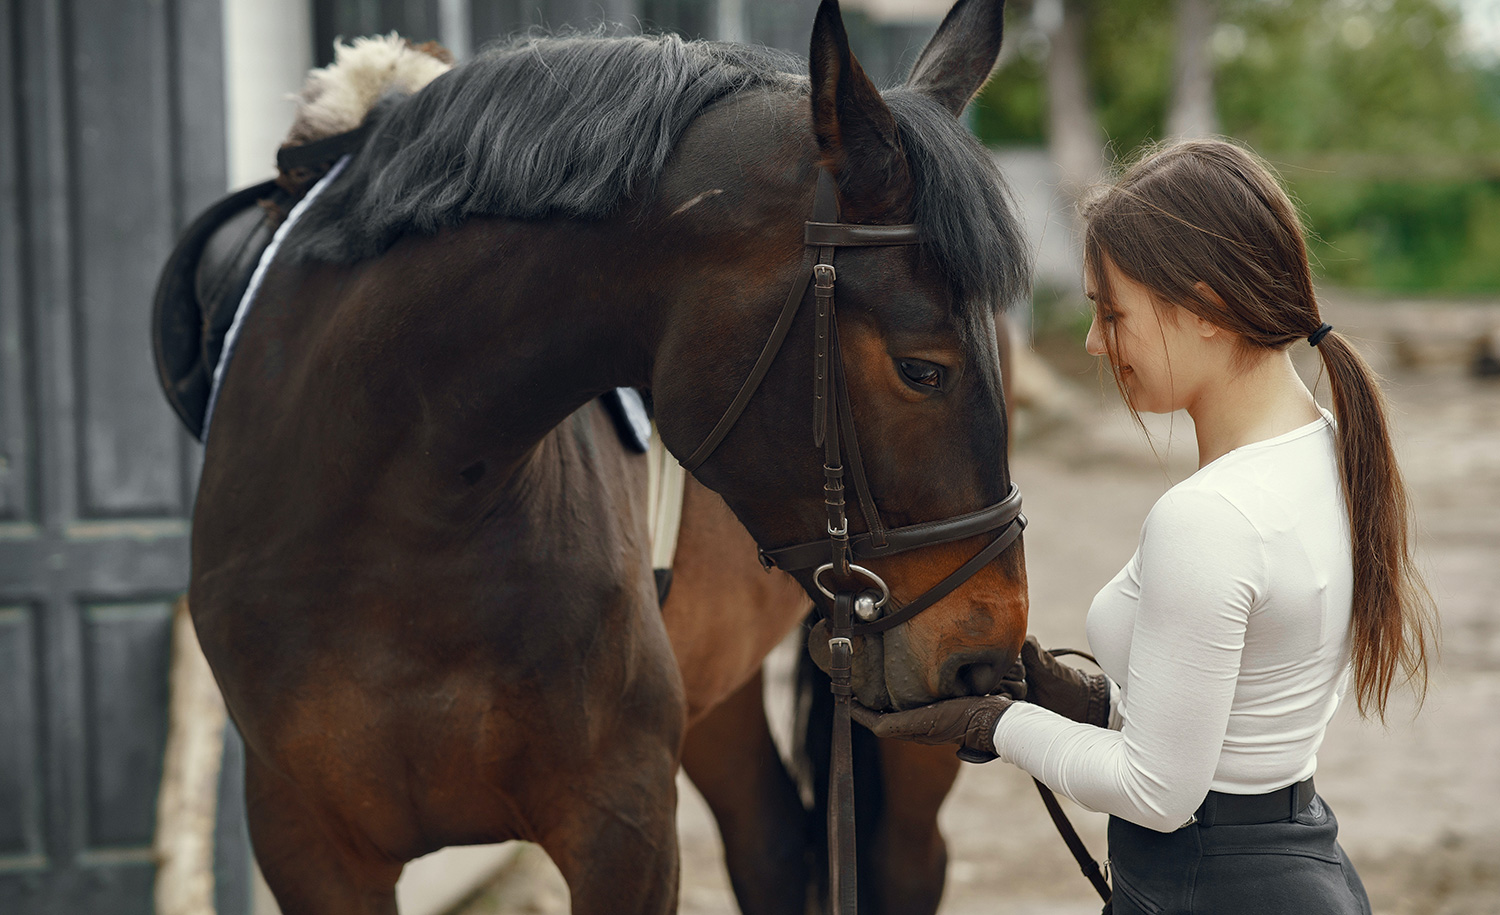 A highly sensitive woman volunteers with horses